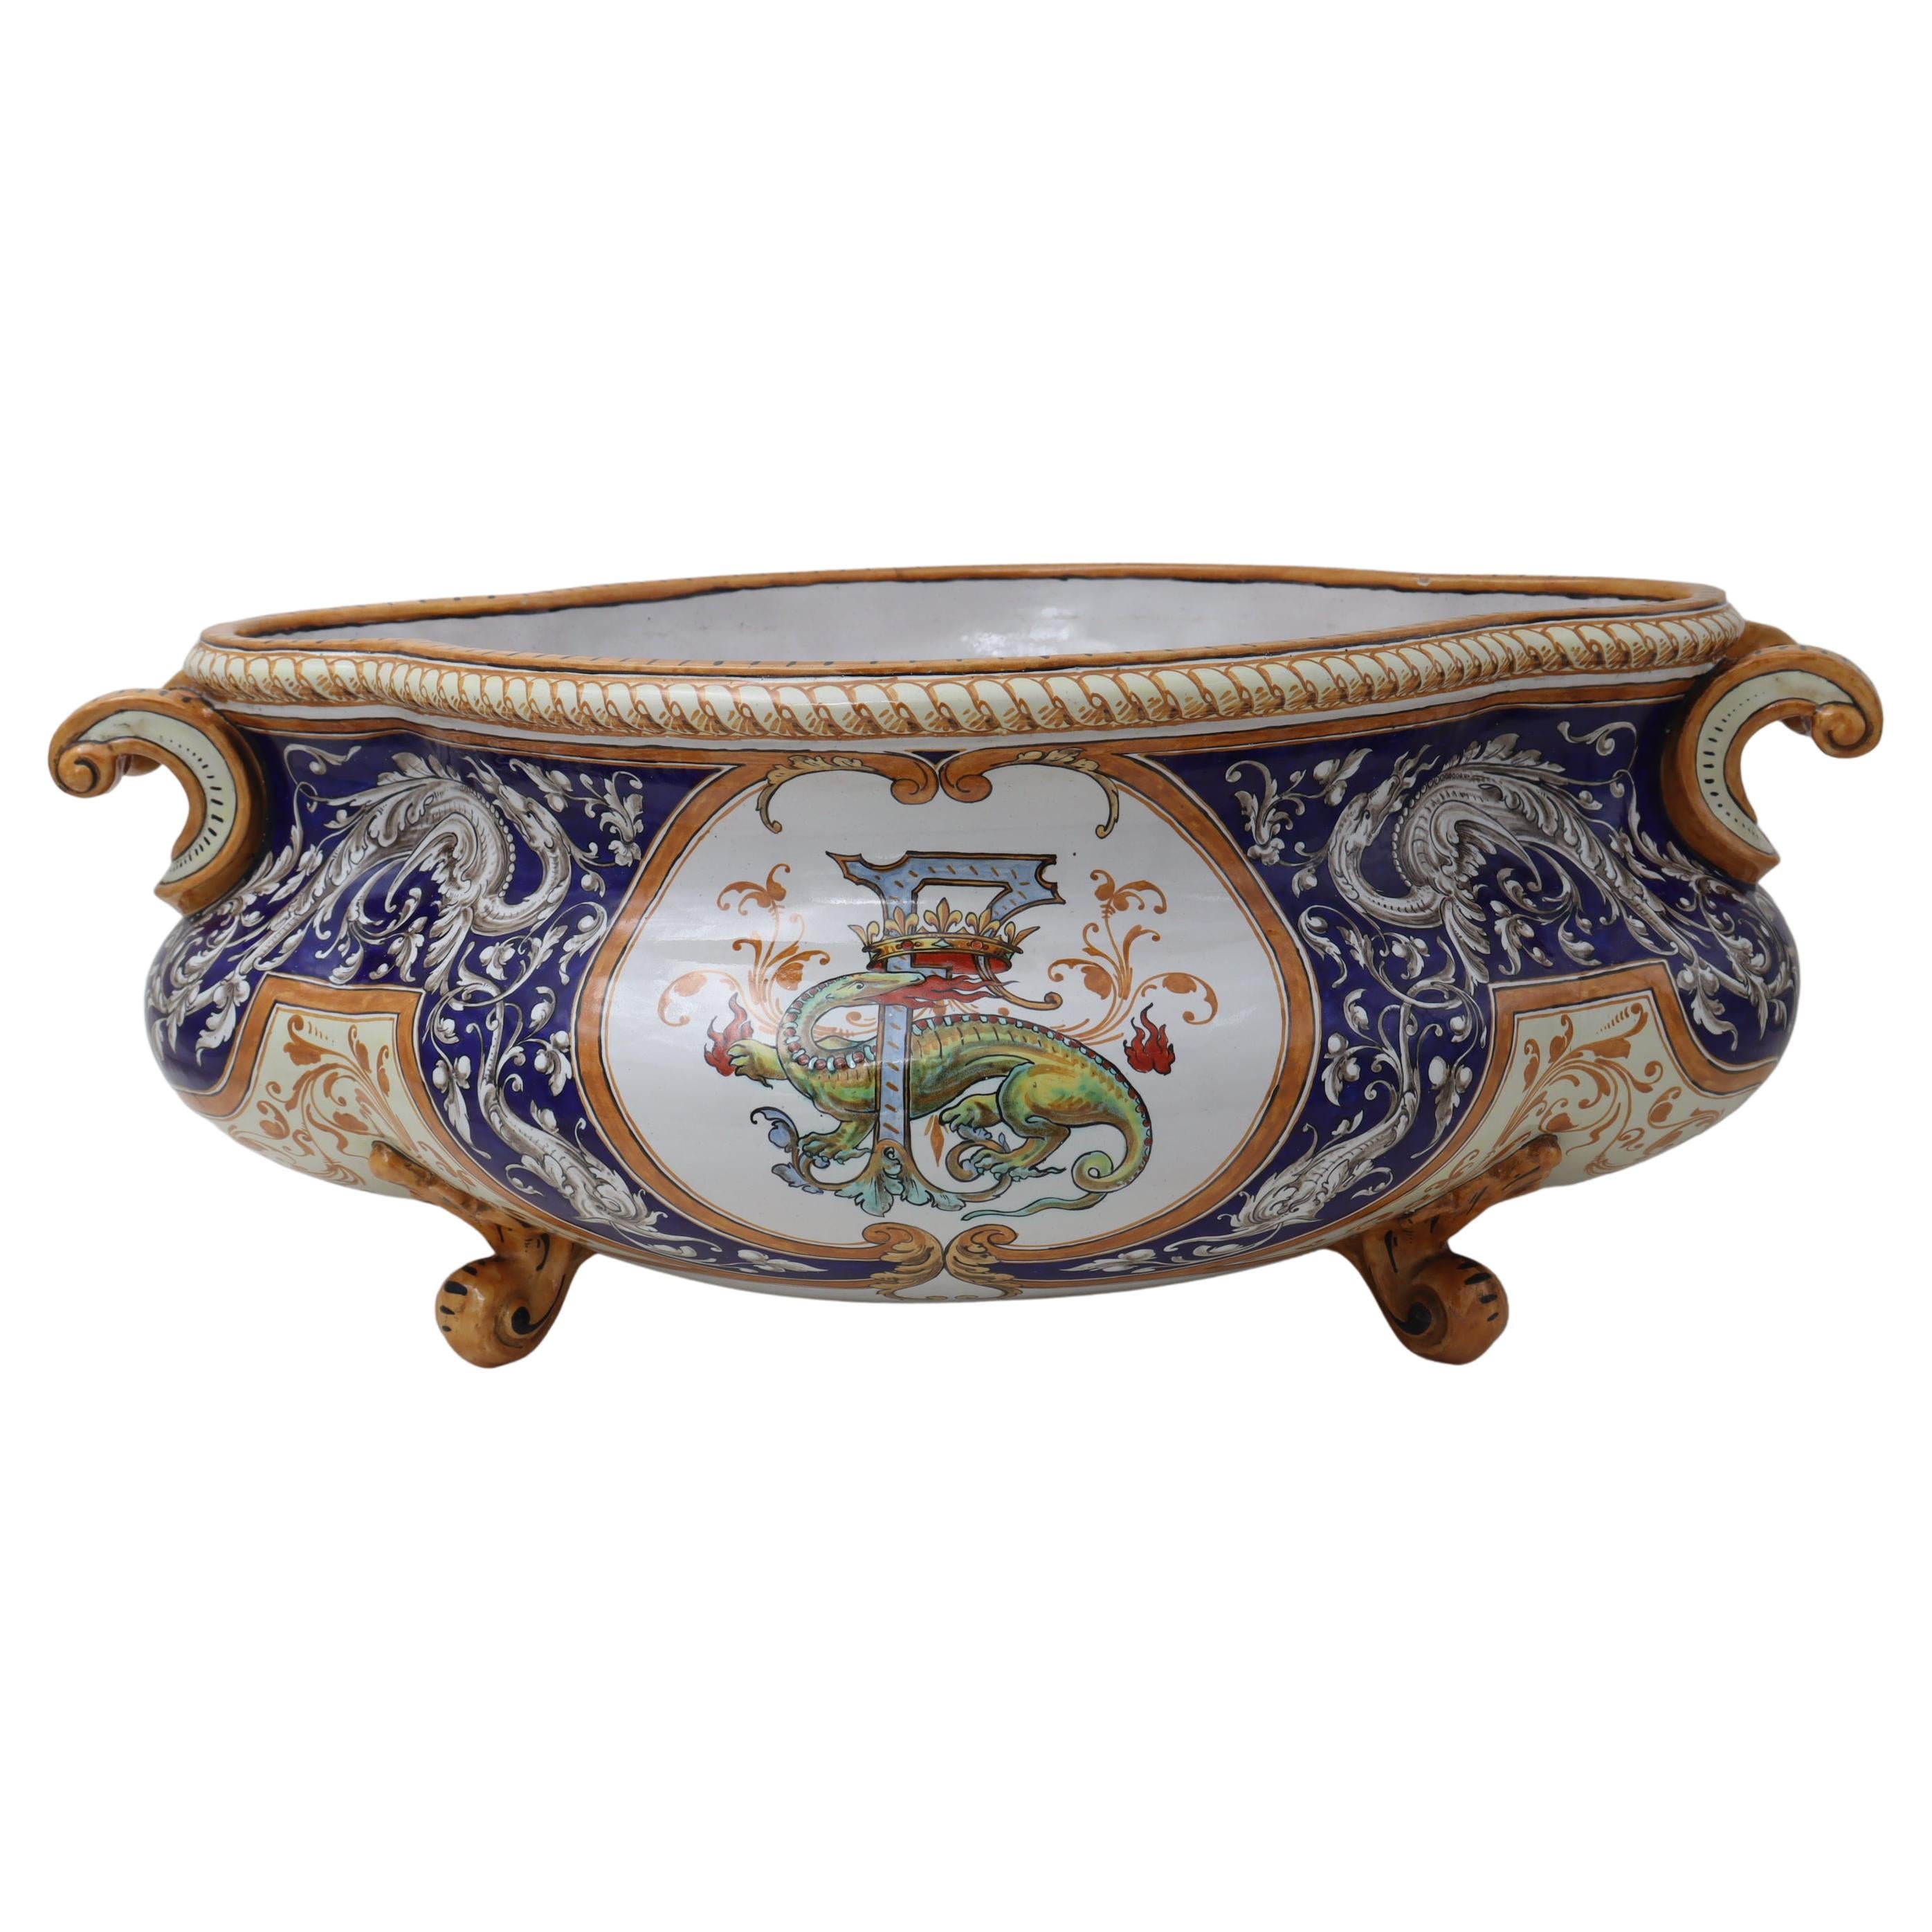 Hand Painted Jardiniere by Ulysse Besnard of Blois